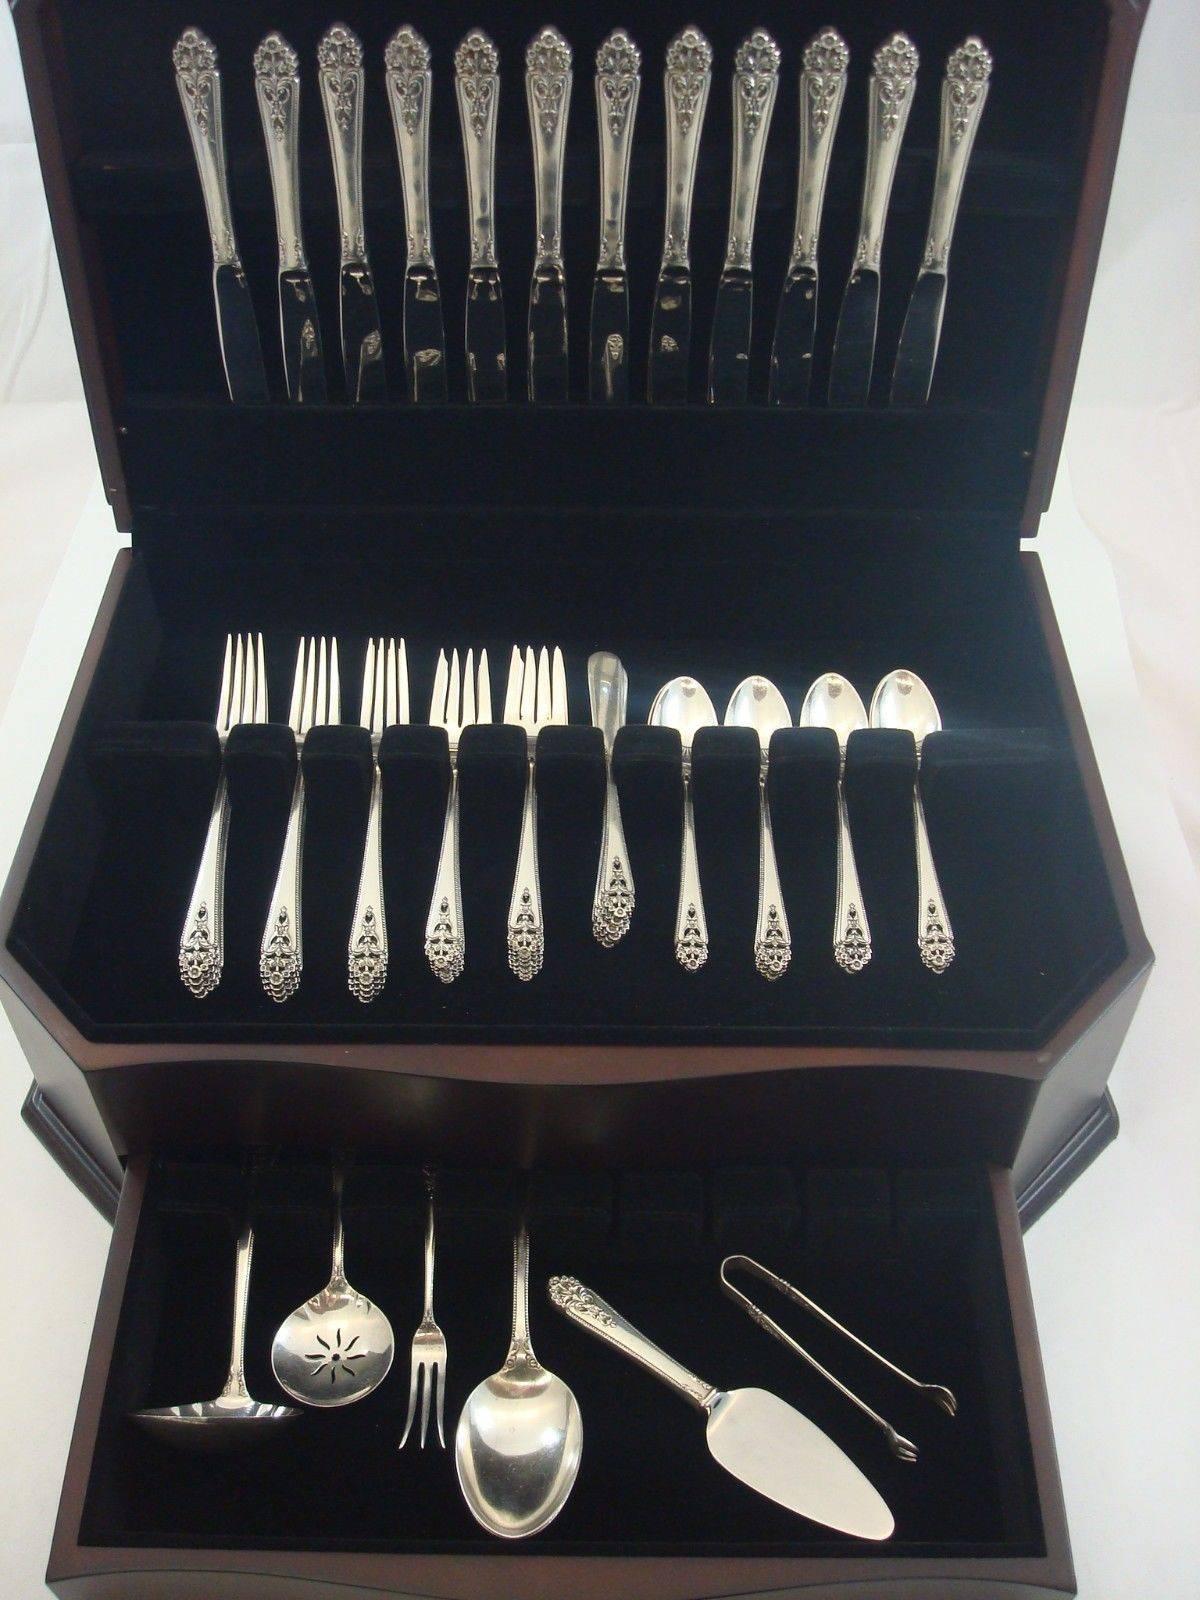 Queen's lace by International sterling silver flatware set, 67 pieces. This set includes:

12 knives, 9 1/8